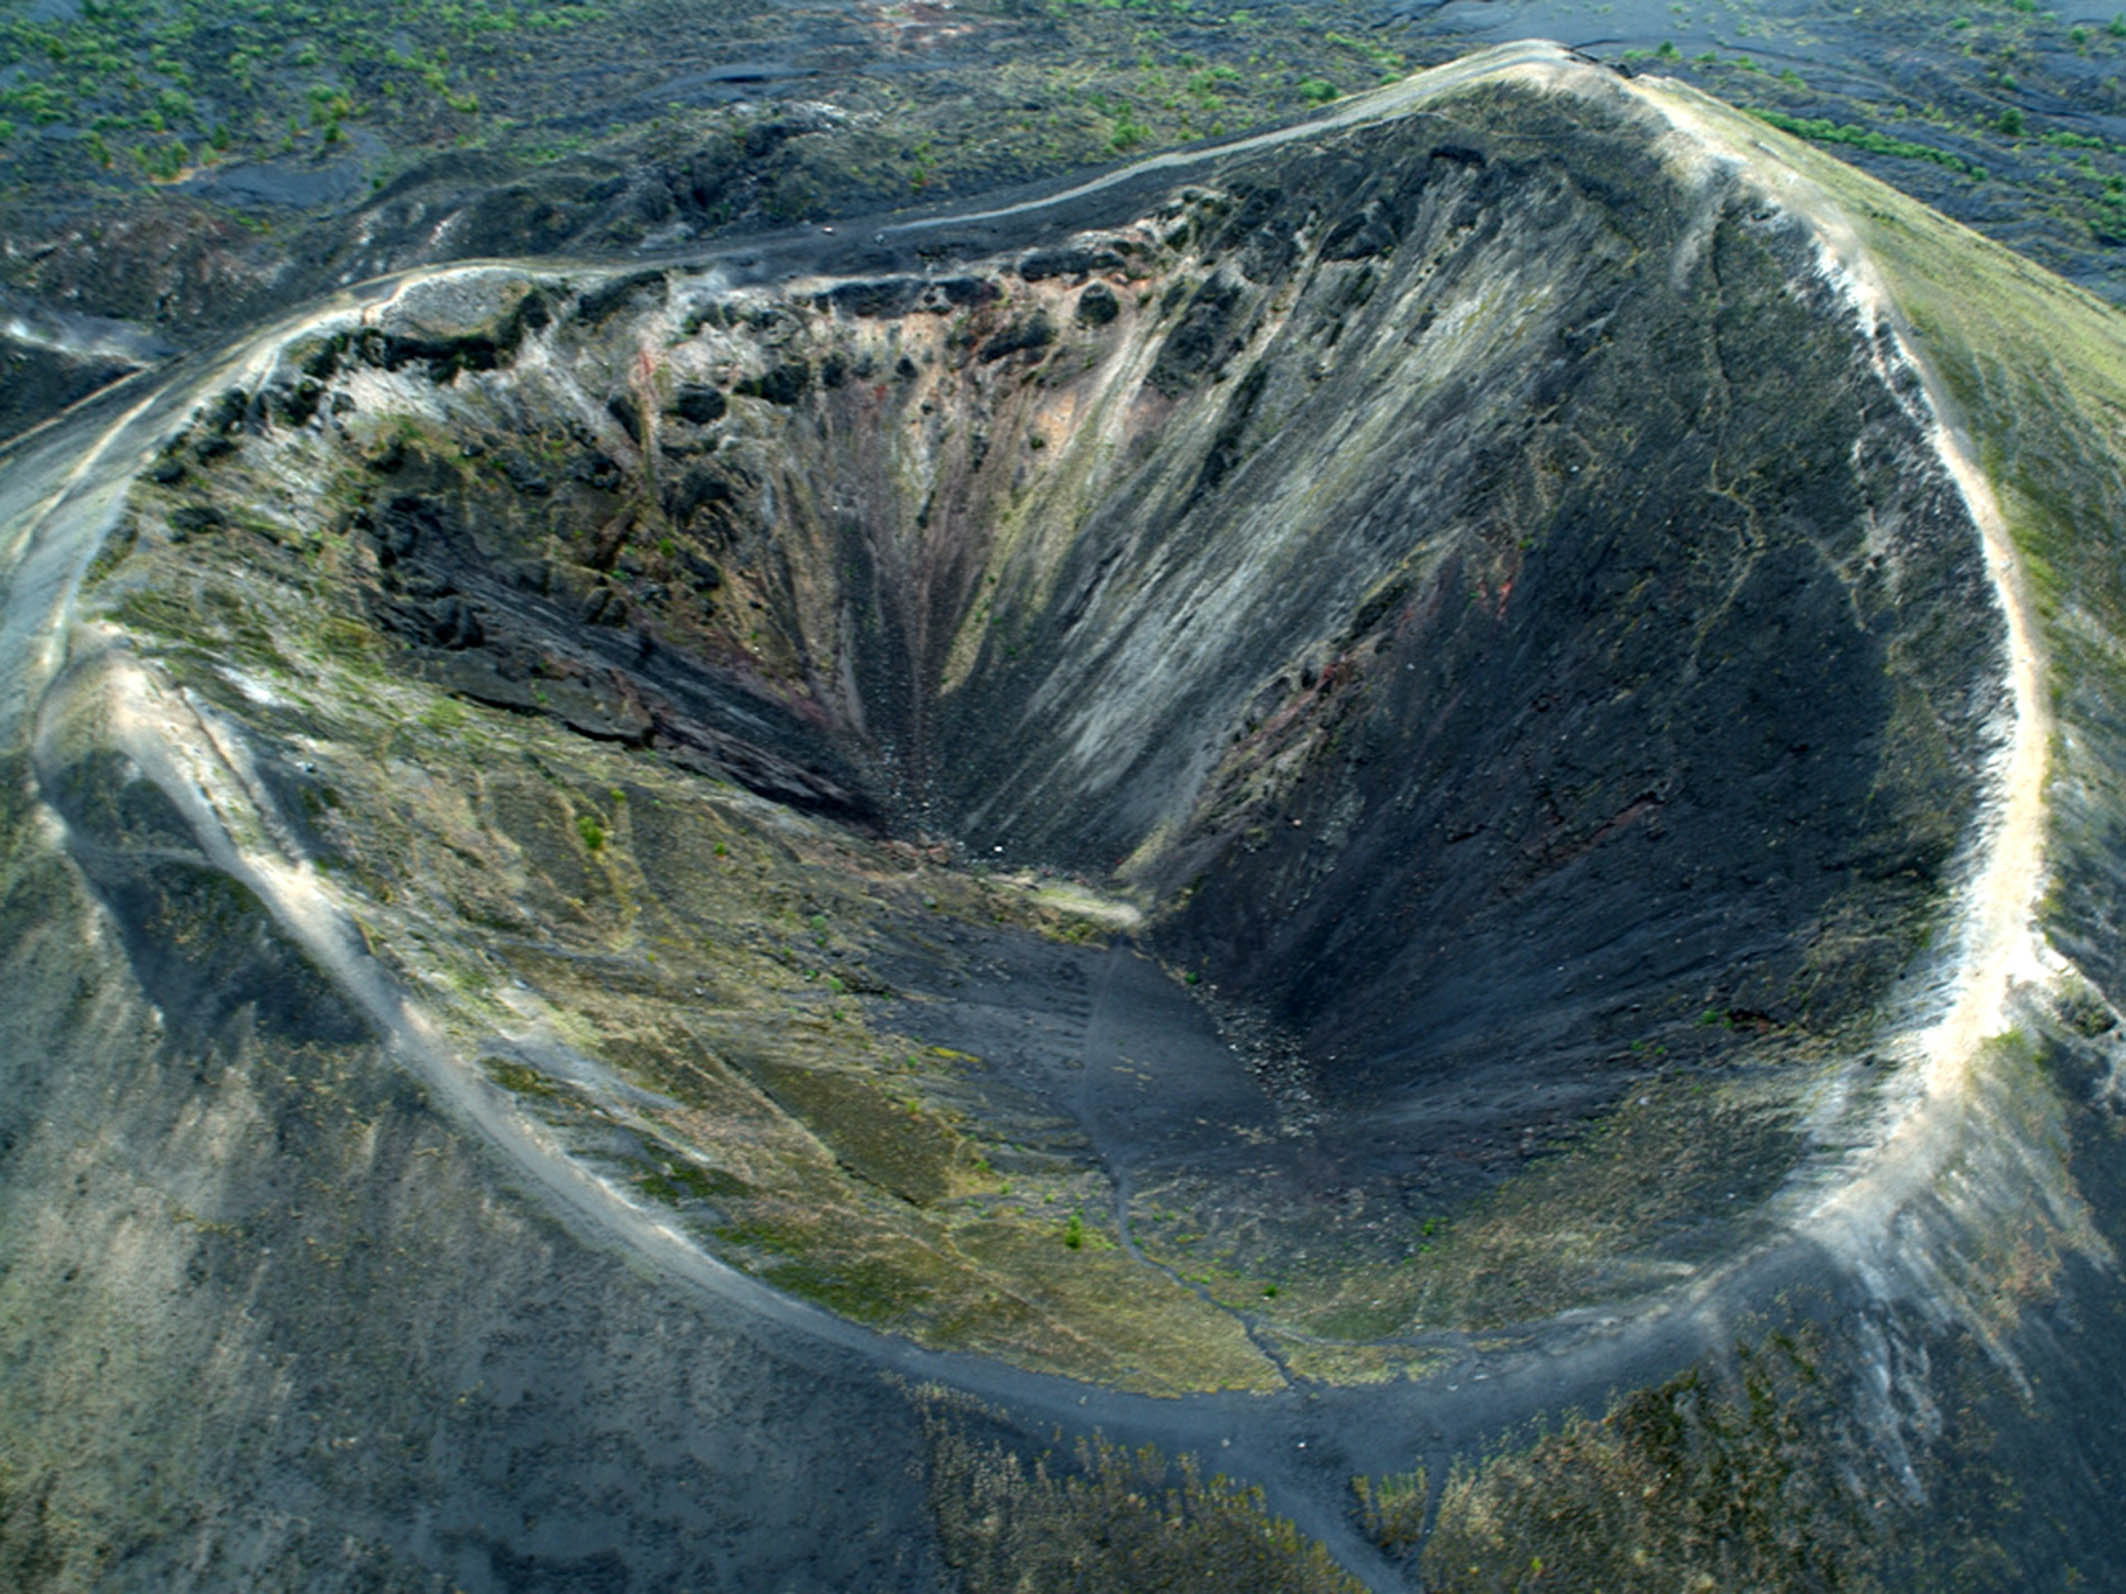 This is what a monogenetic volcano looks like, the Paricutín in Michoacán